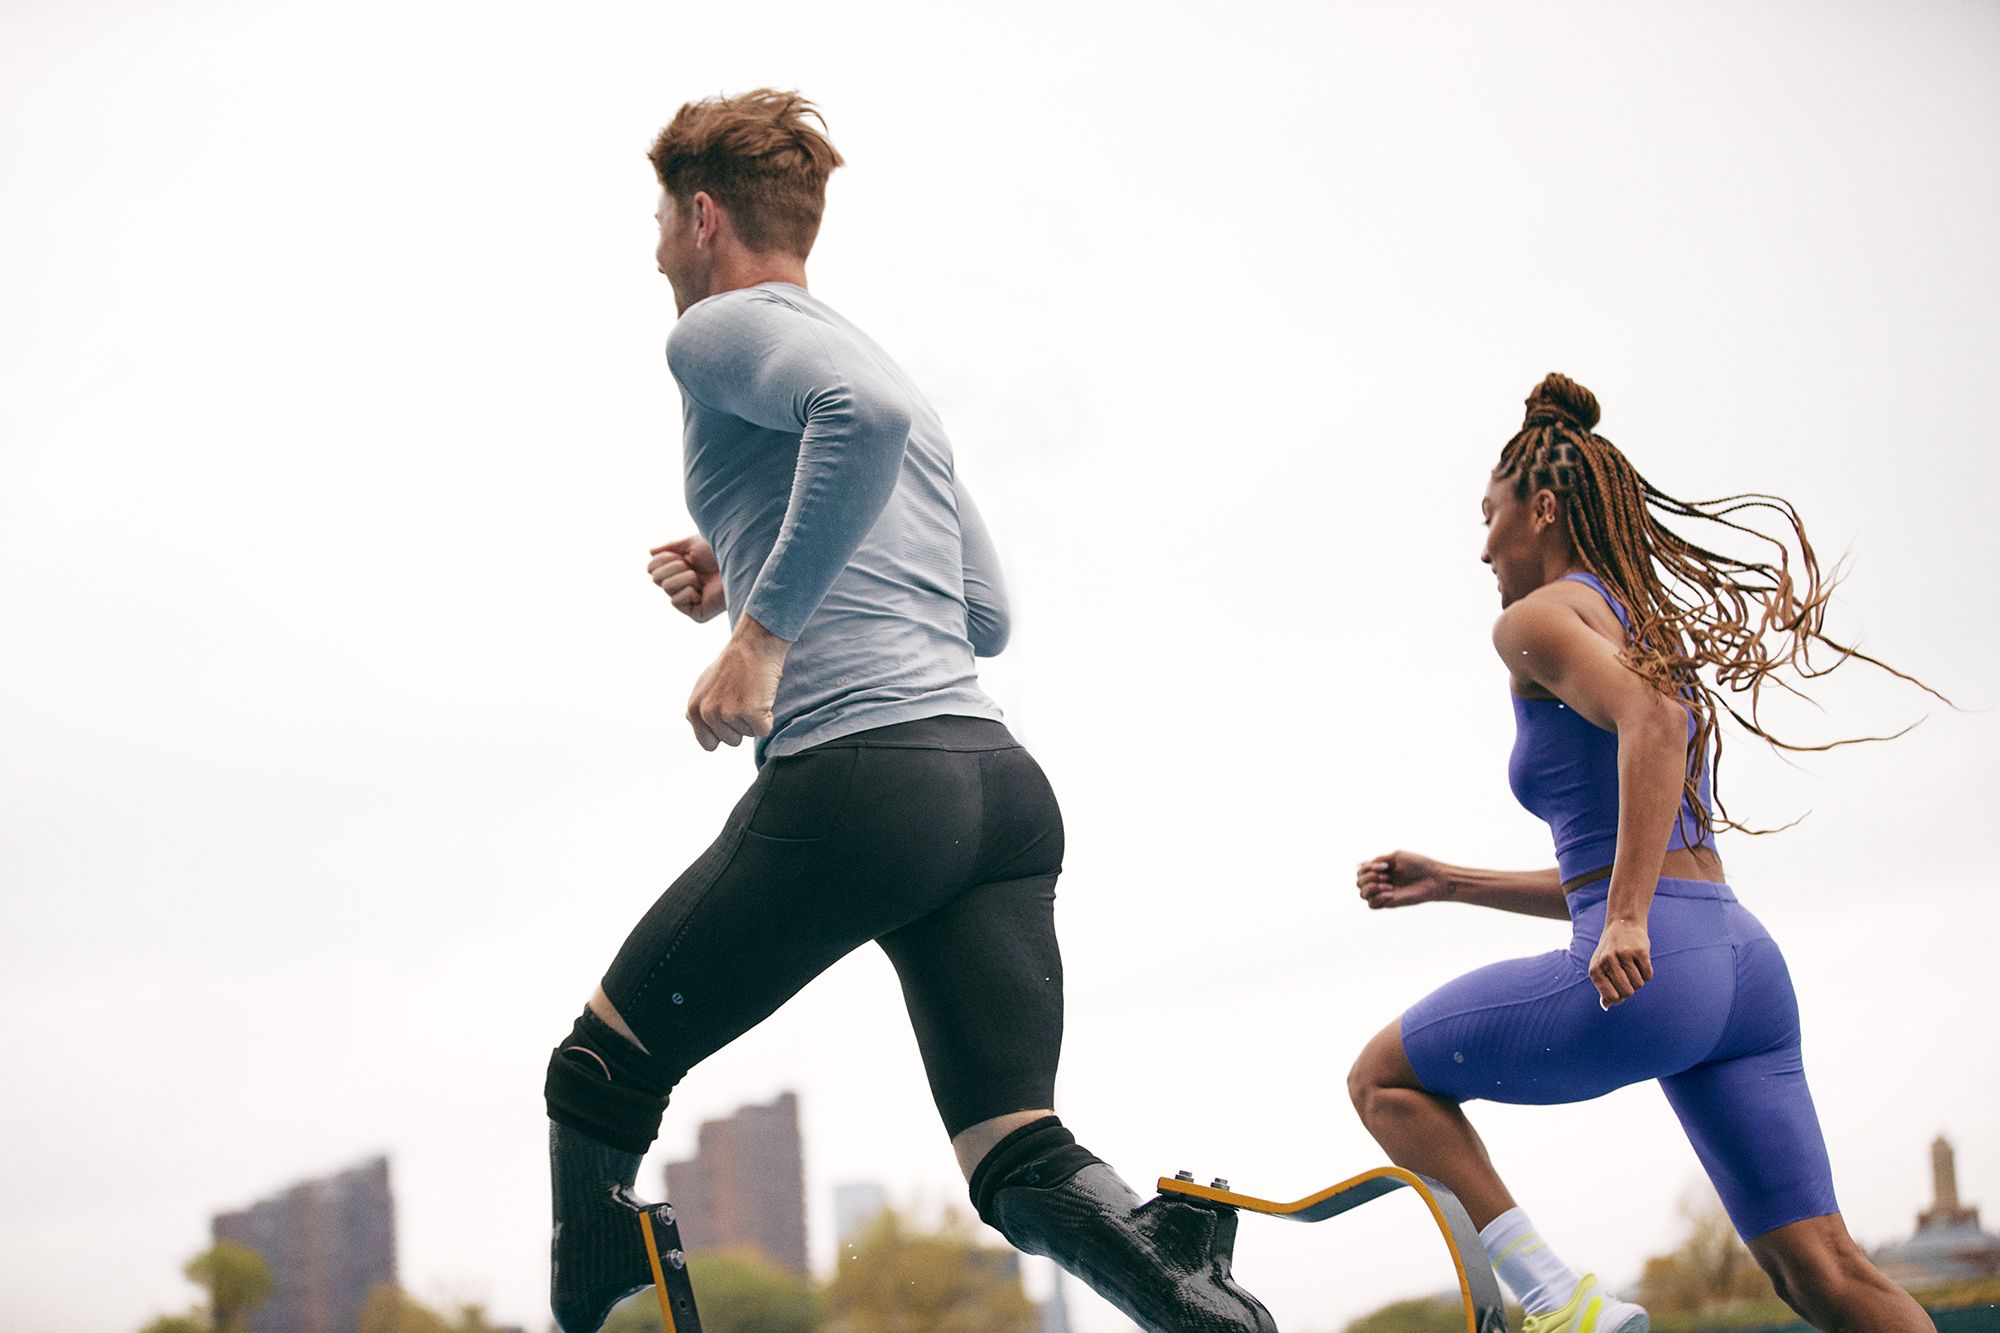 lululemon Launches SenseKnit™ Running Collection That Goes The